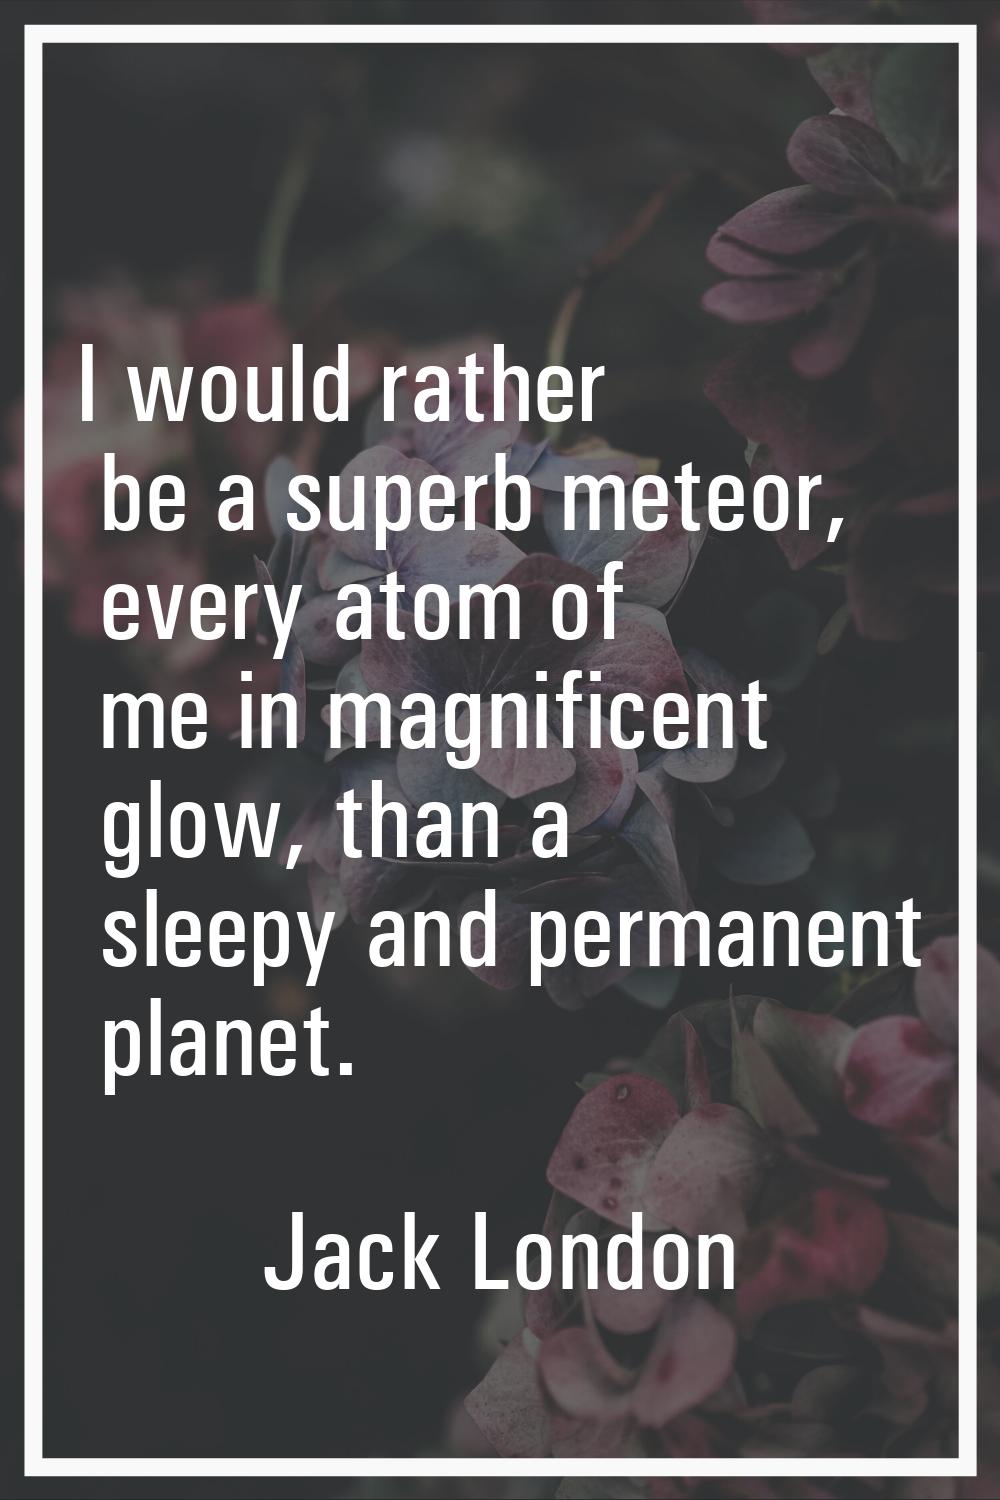 I would rather be a superb meteor, every atom of me in magnificent glow, than a sleepy and permanen